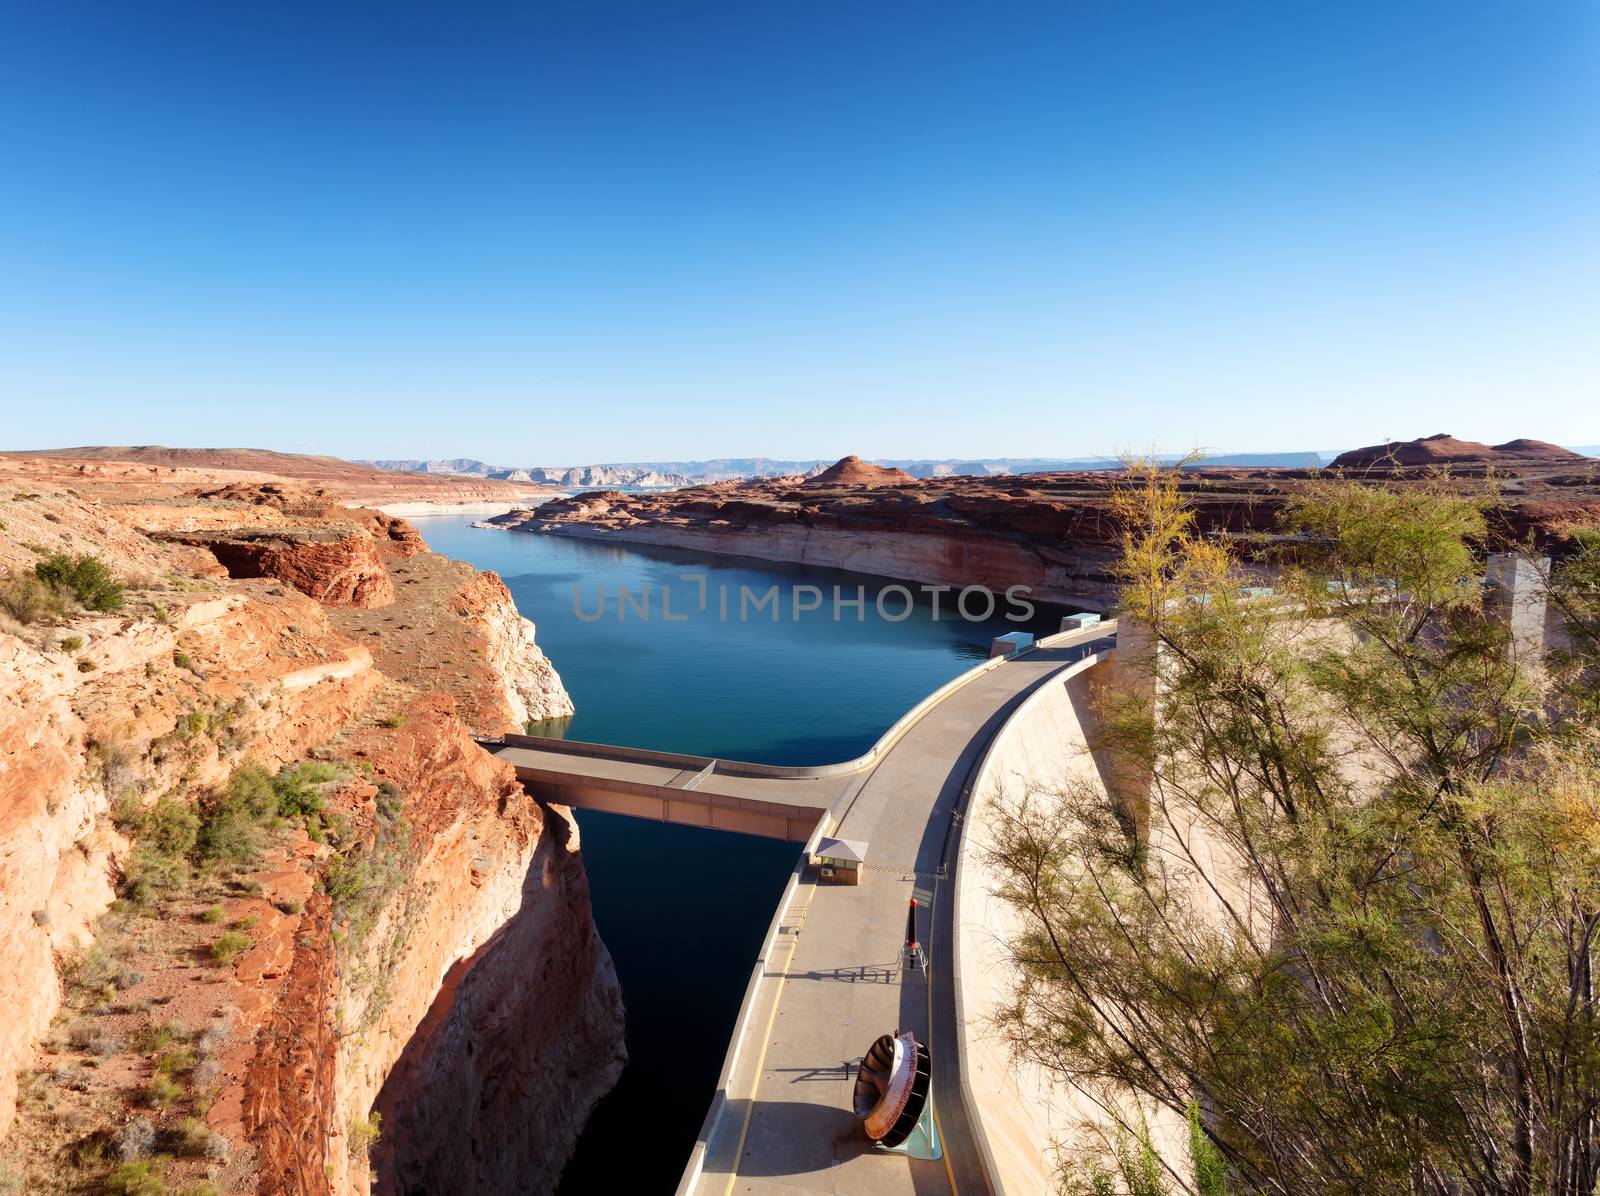 Glen Canyon hydropower Dam on the Colorado River in Arizona  by tab1962